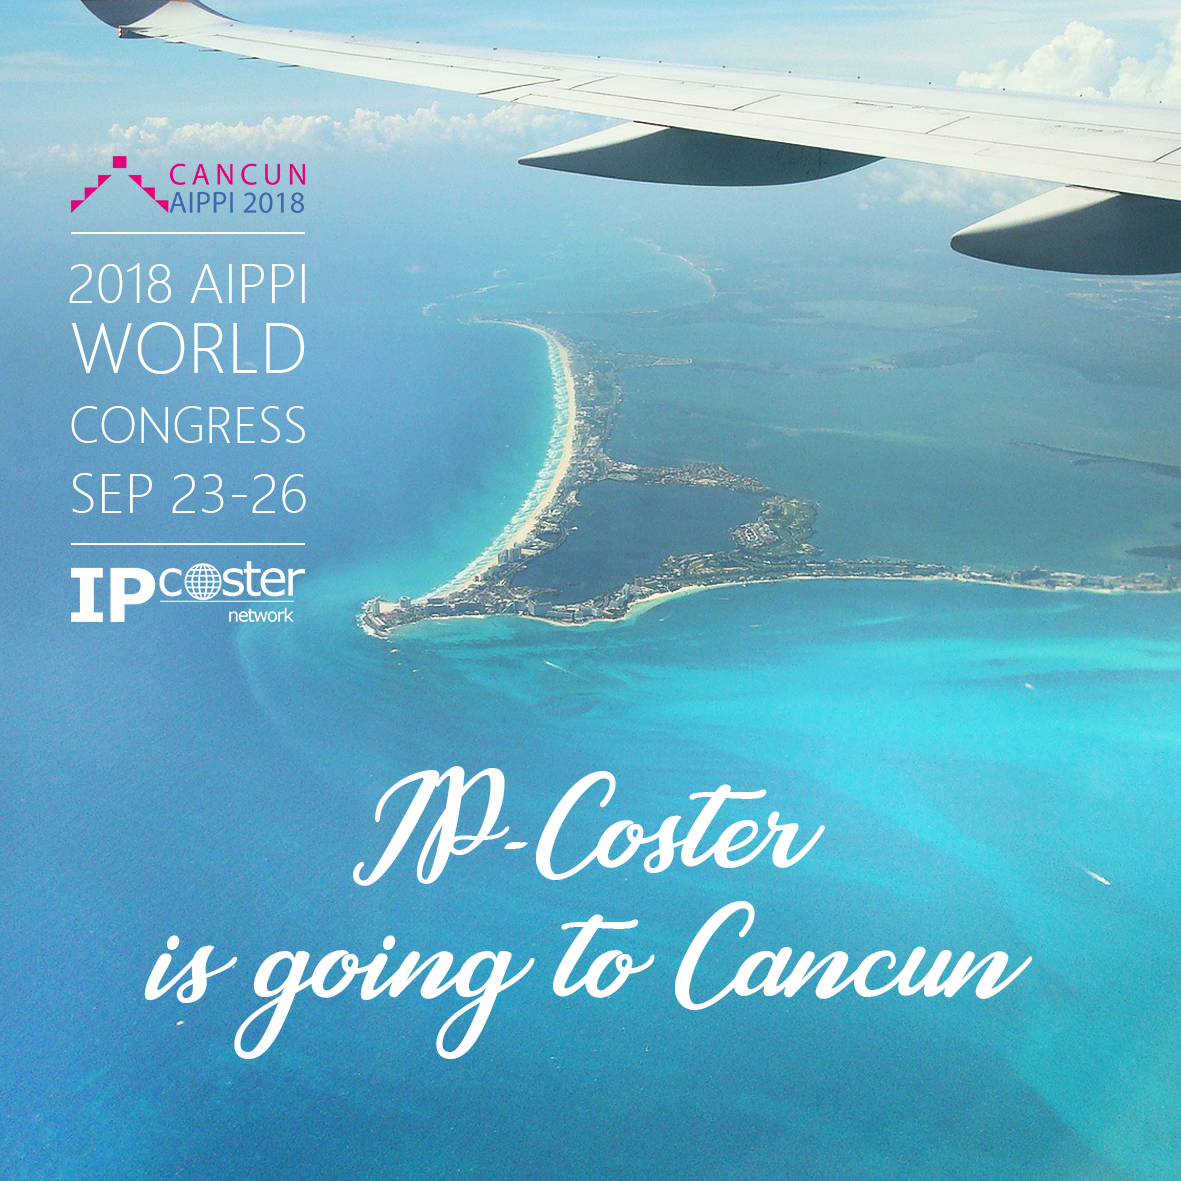 We are pleased to announce that IP-Coster are exhibitors at the upcoming AIPPI World Congress in  Cancun, Mexico. 